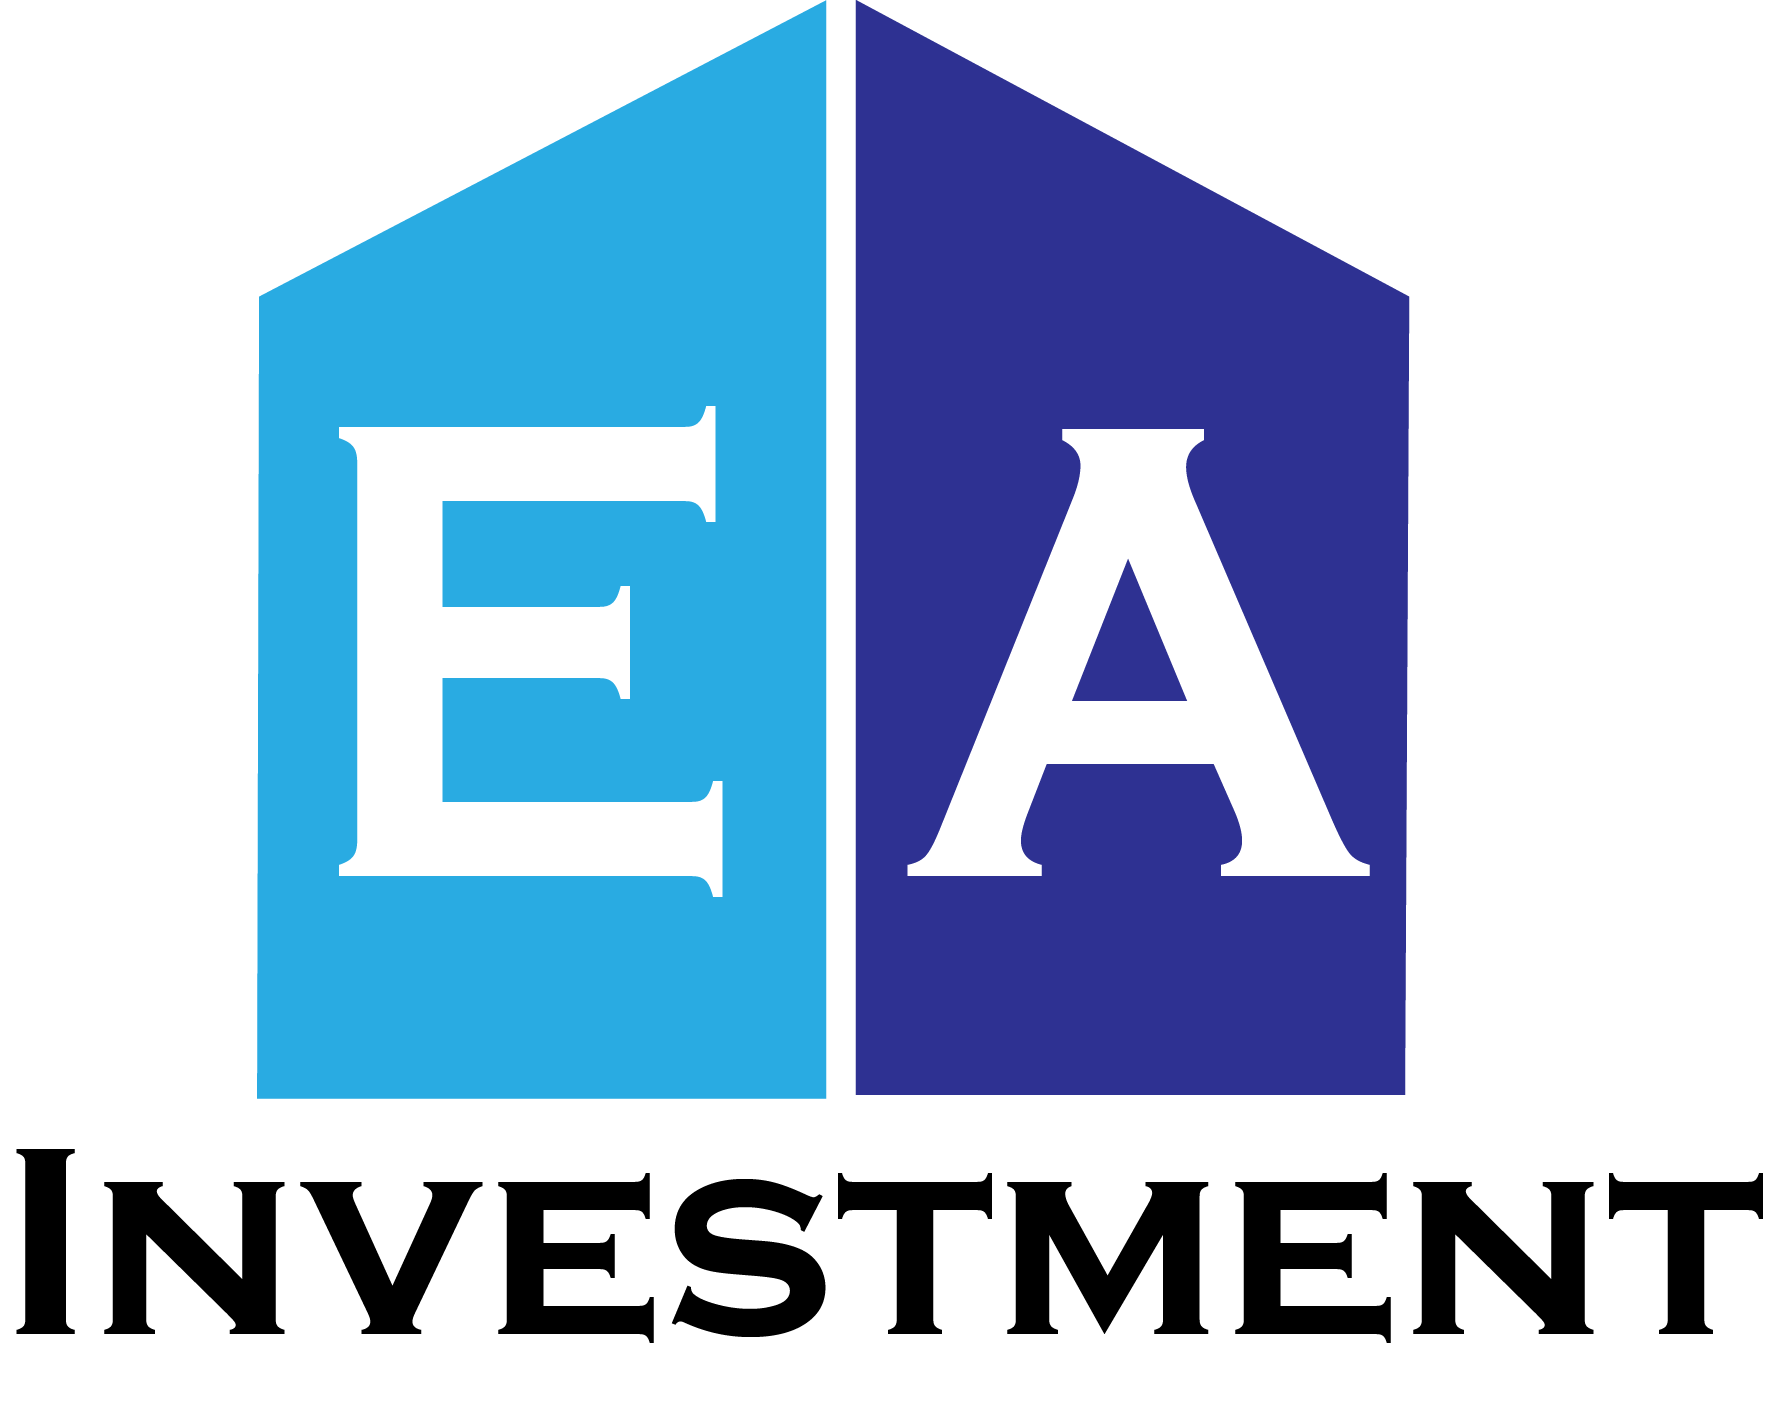 EA Investment logos